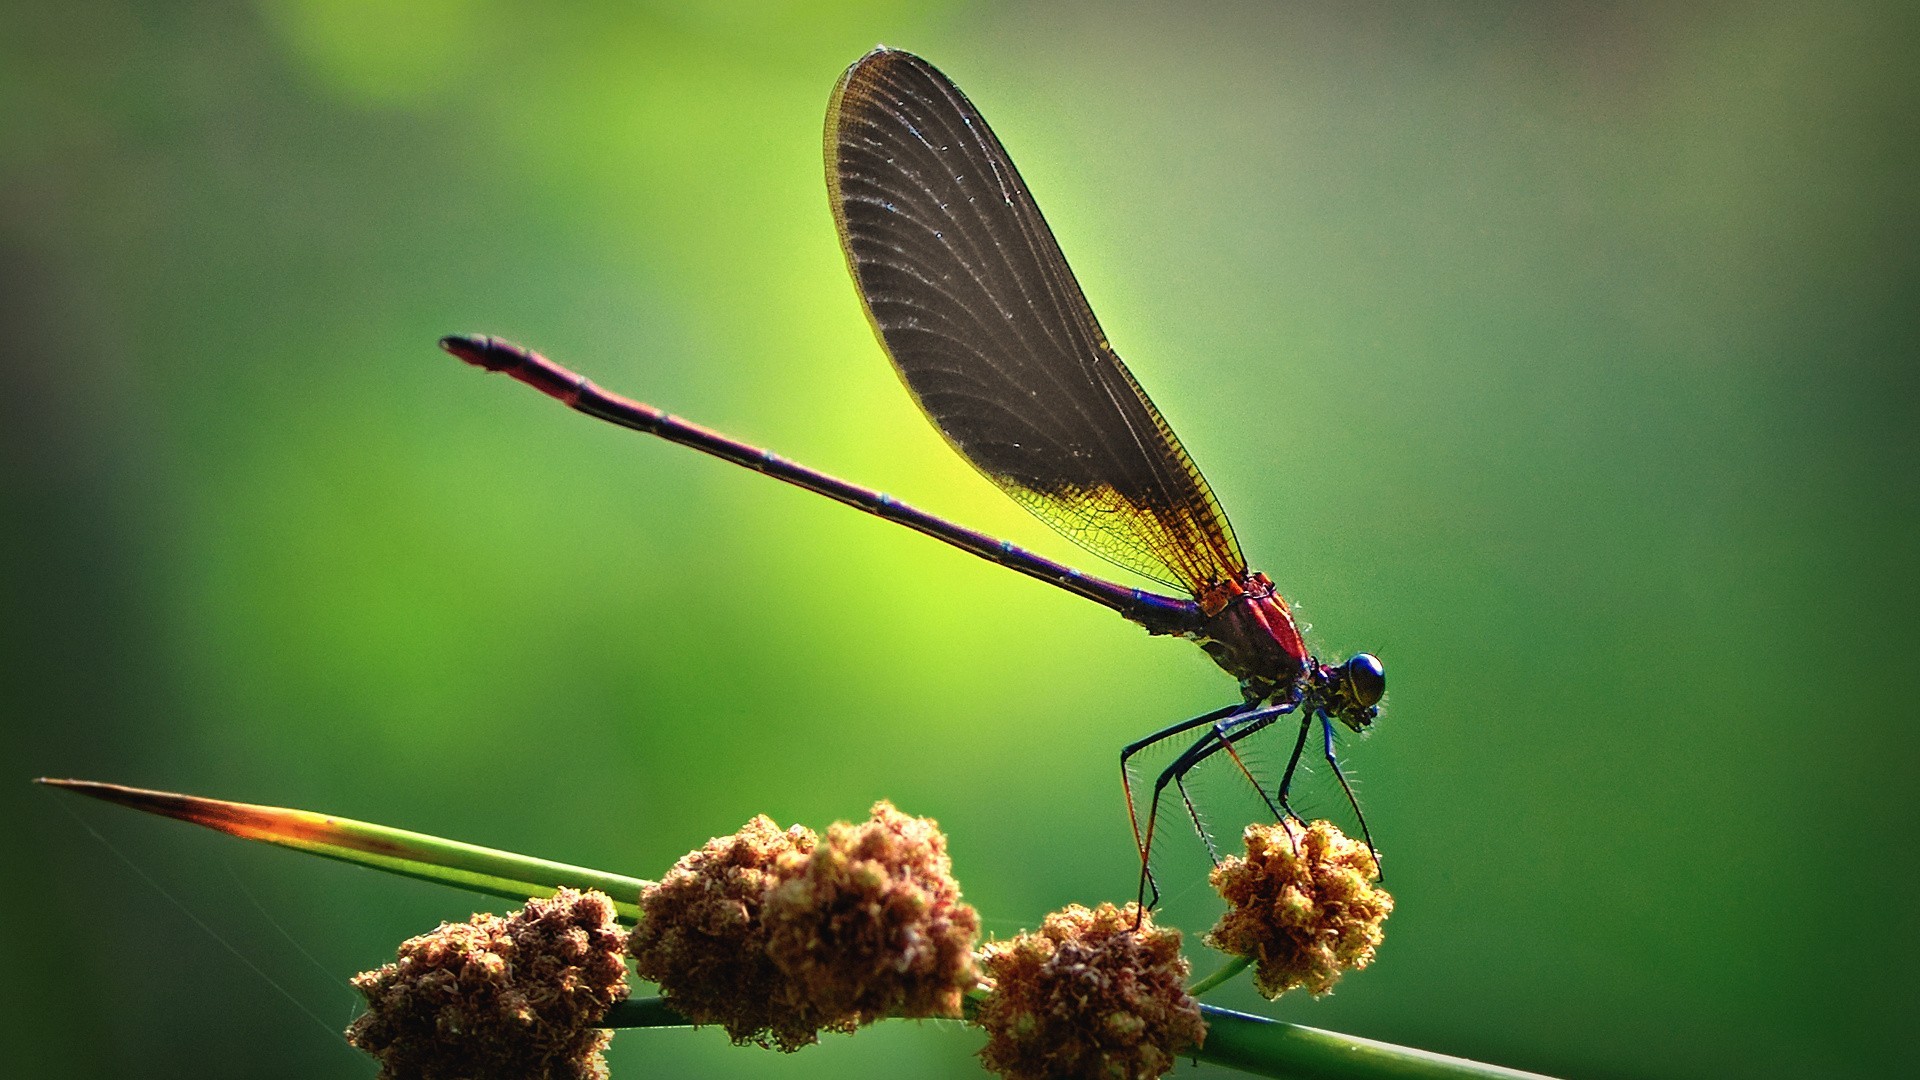 General 1920x1080 nature flying animals green artwork dragonflies insect plants macro